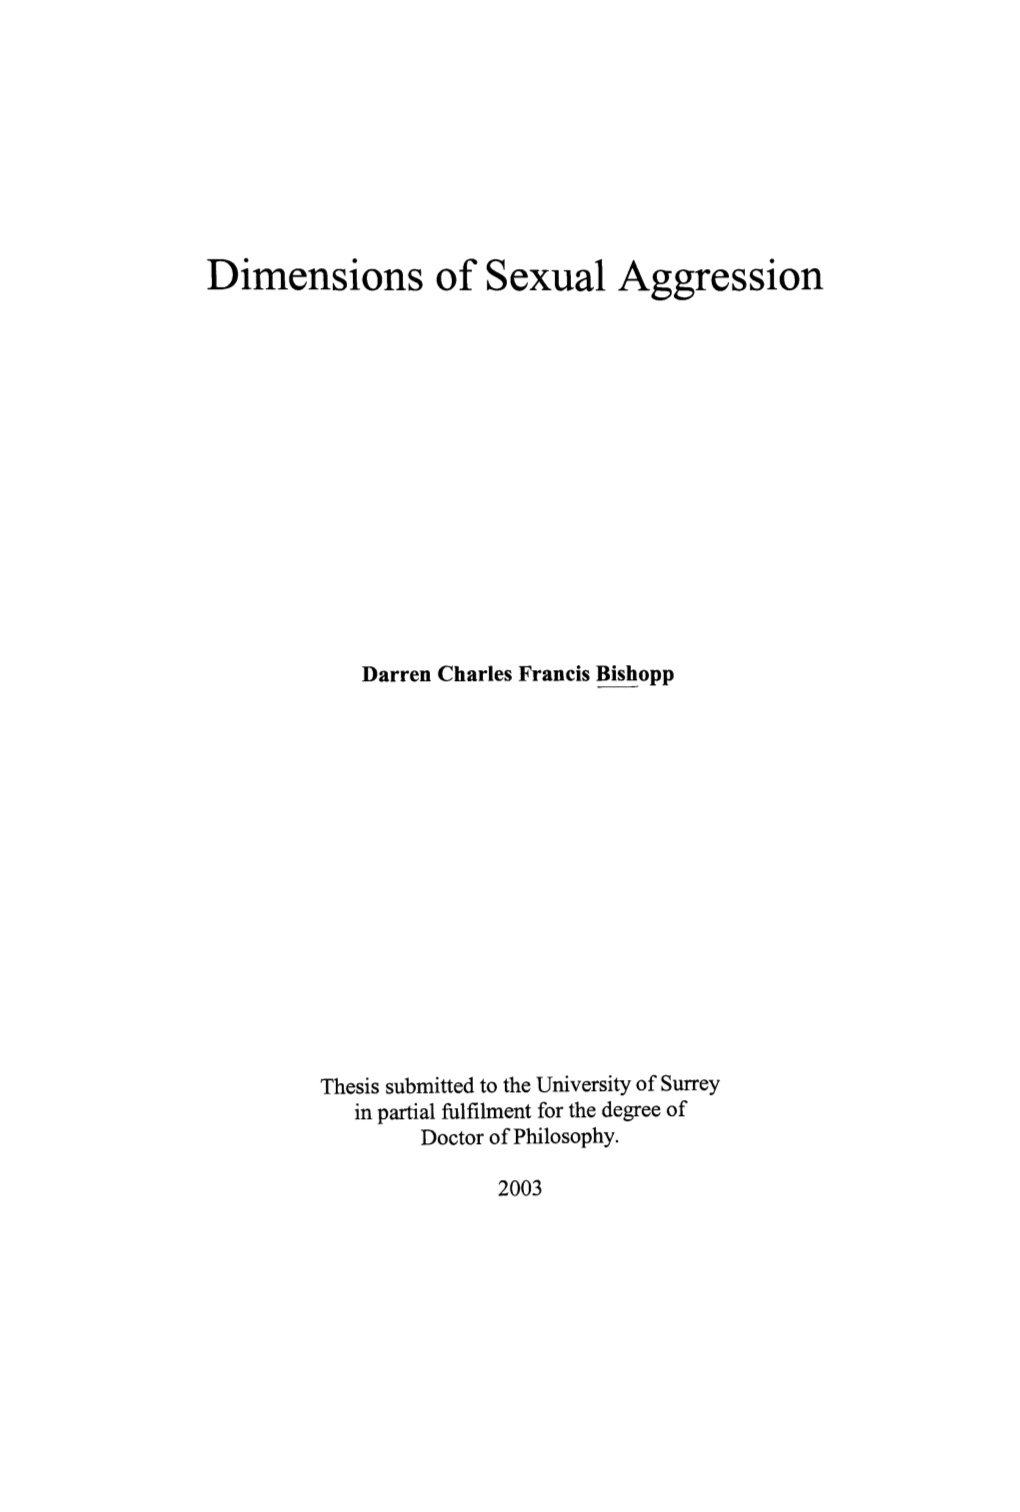 Dimensions of Sexual Aggression